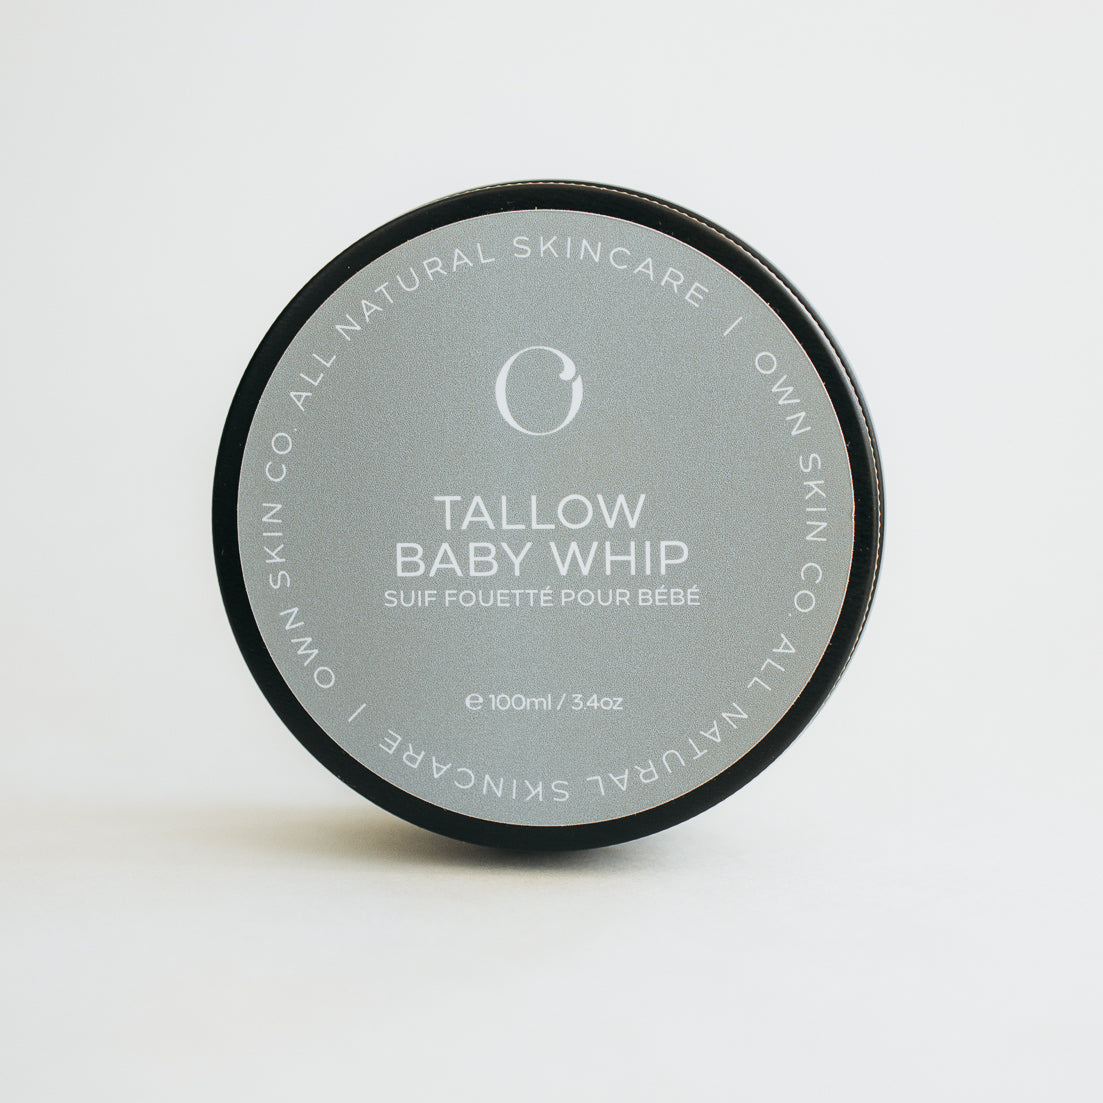 Whipped Tallow for Baby